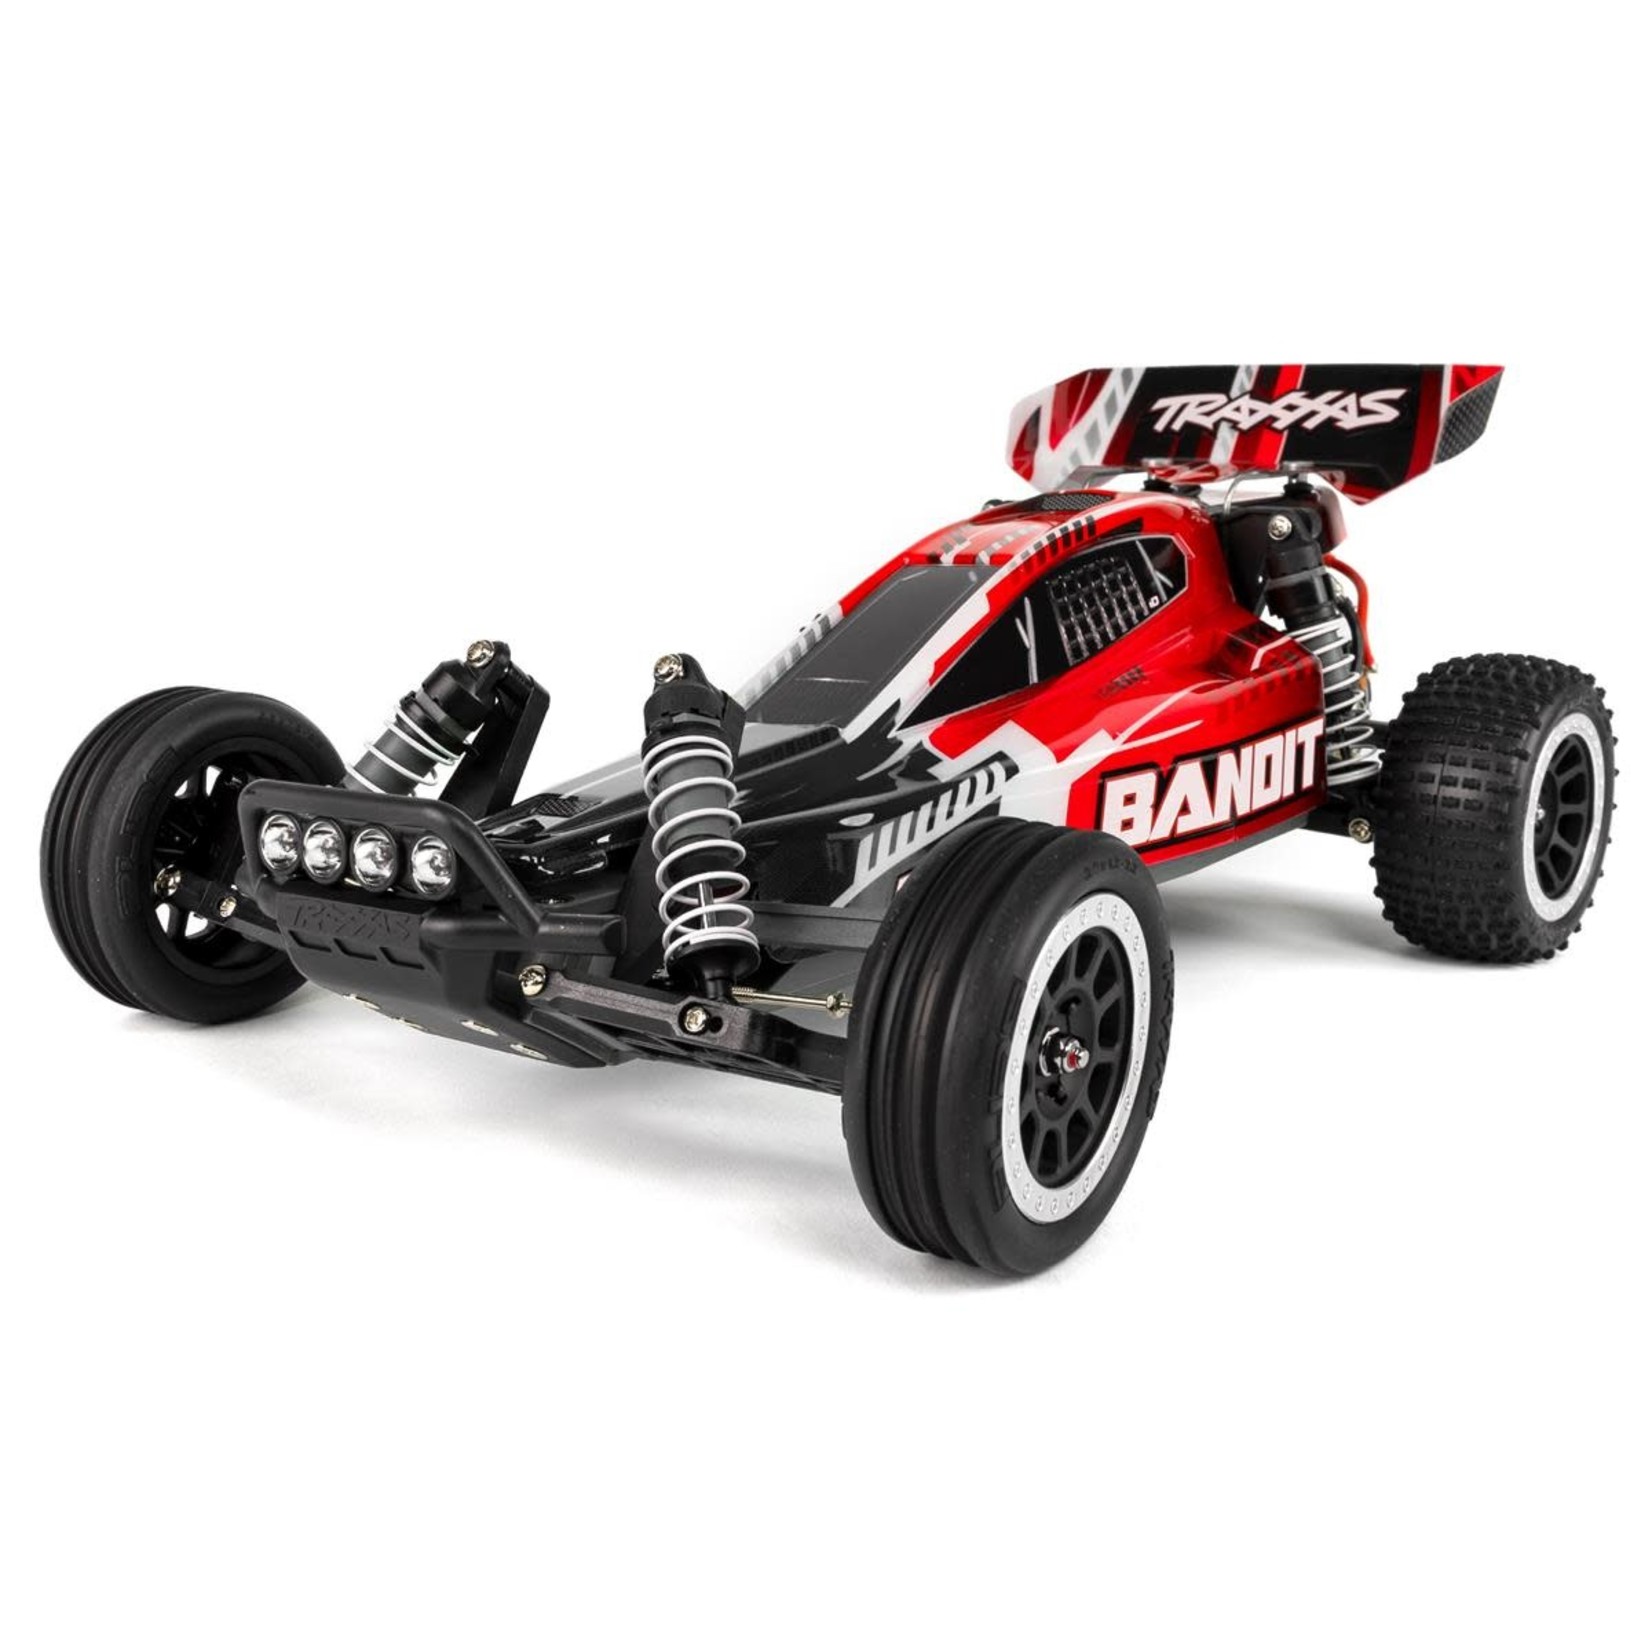 Traxxas Traxxas Bandit 1/10 RTR 2WD Electric Buggy w/LED Lights (Red/Black) w/XL-5 ESC, TQ 2.4GHz Radio, Battery & DC Charger #24054-61-RBLK